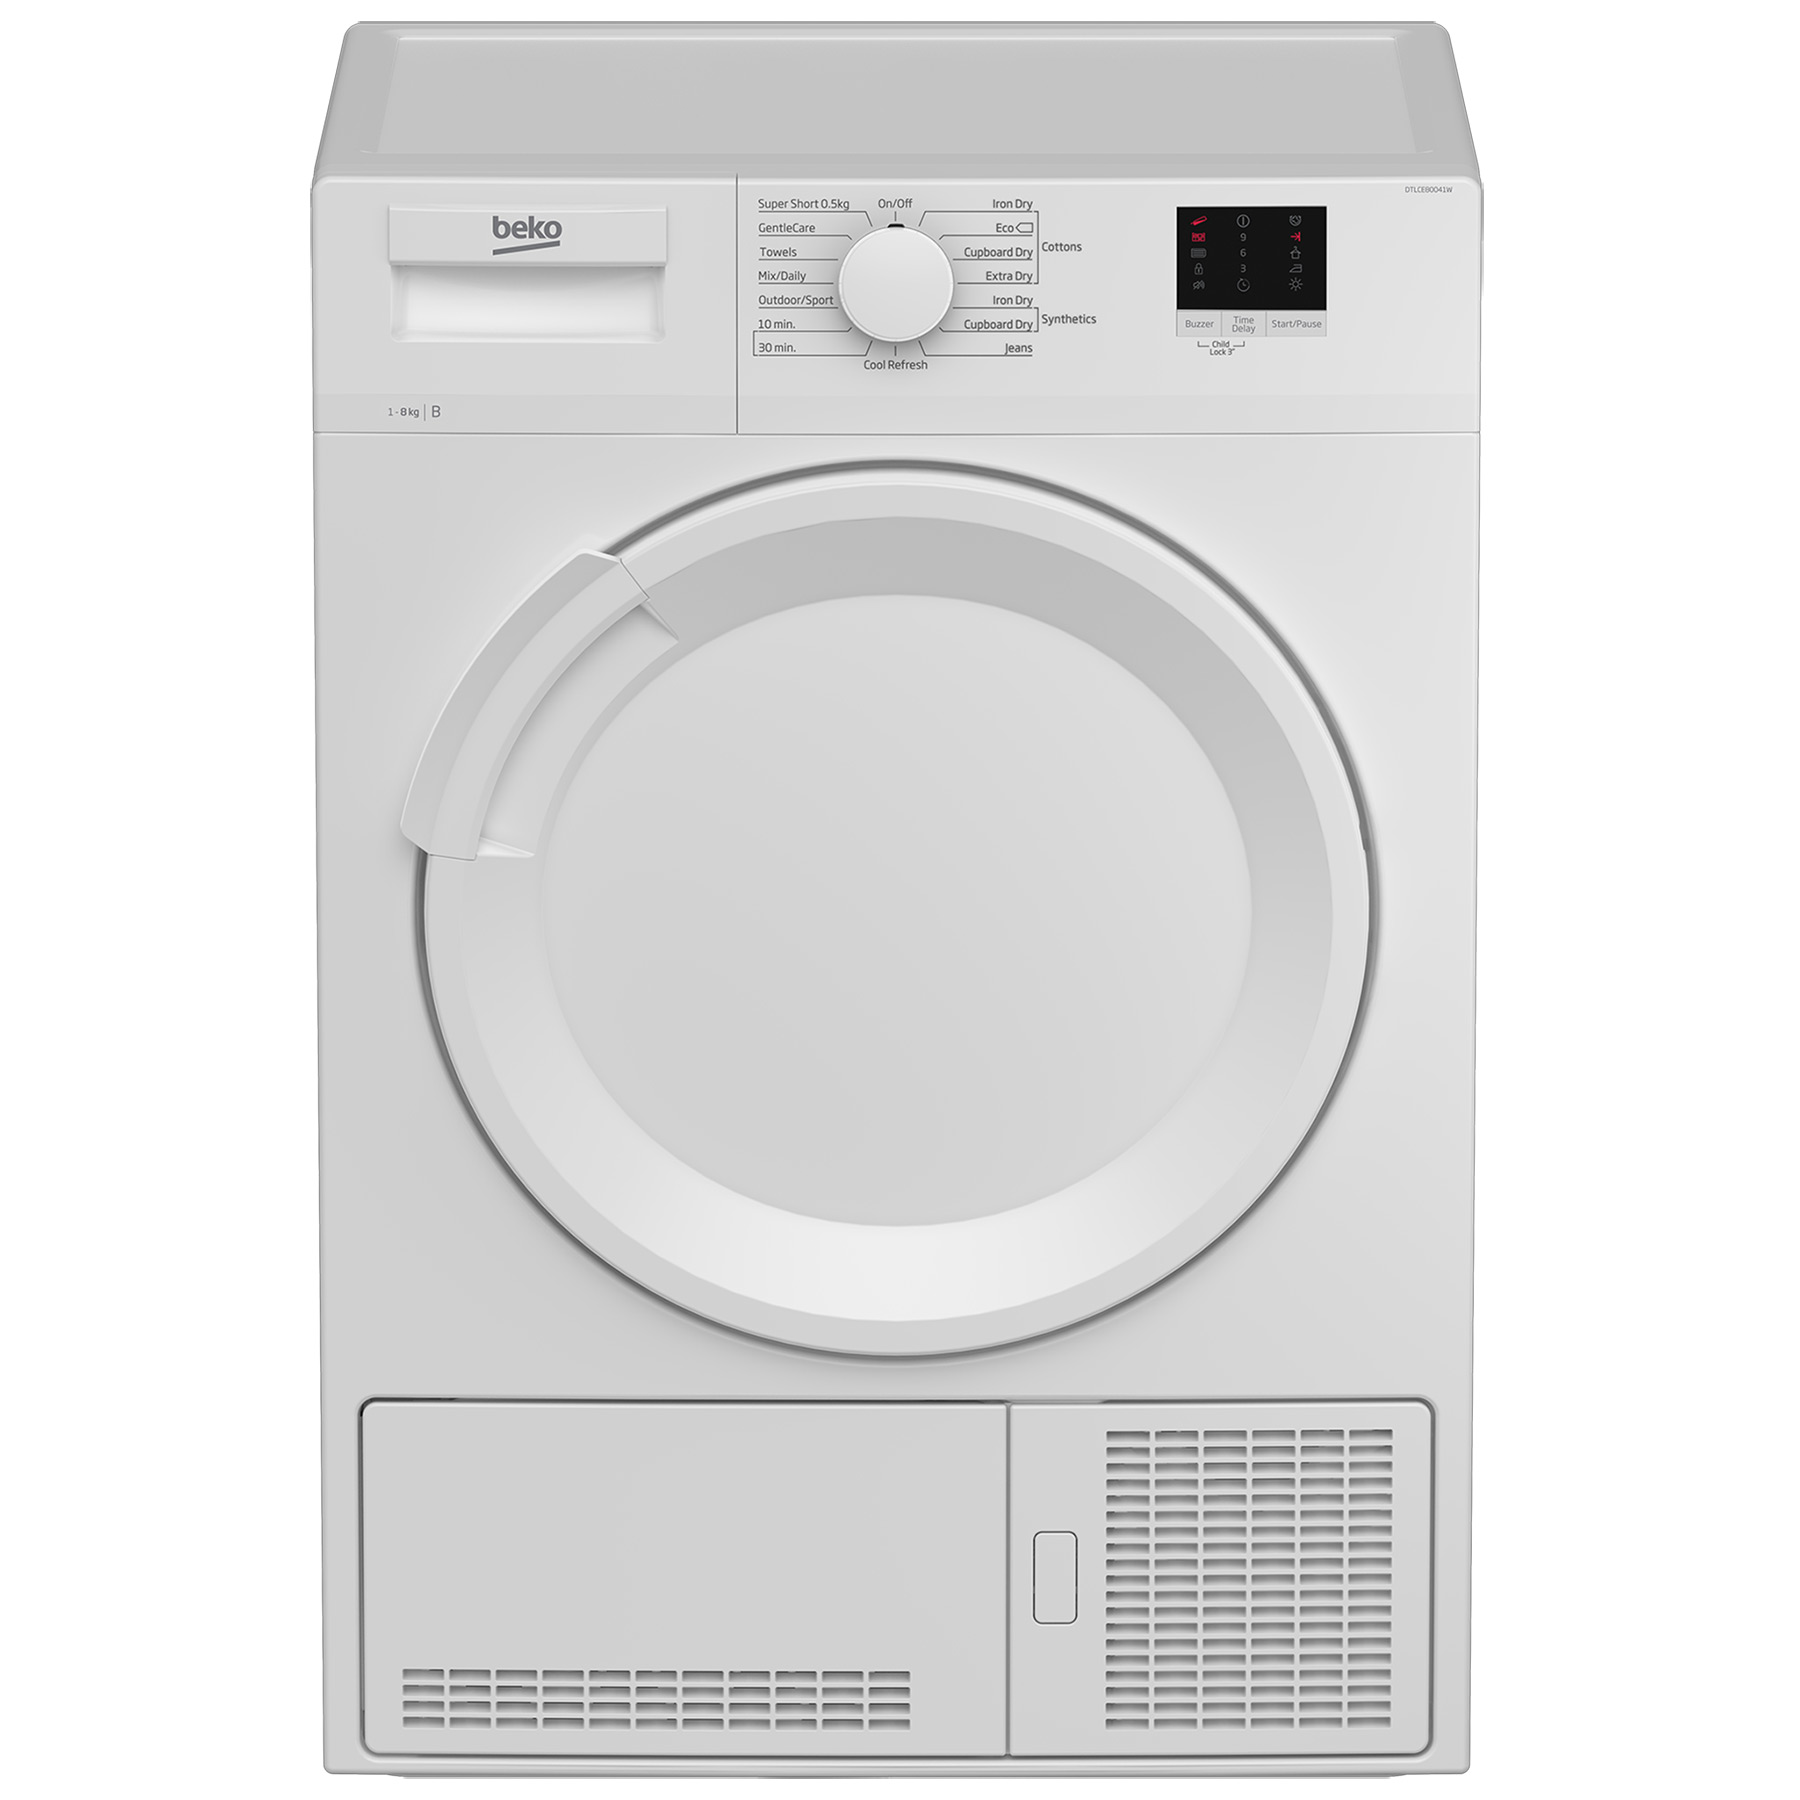 Image of Beko DTLCE80041W 8kg Condenser Dryer in White B Rated Sensor